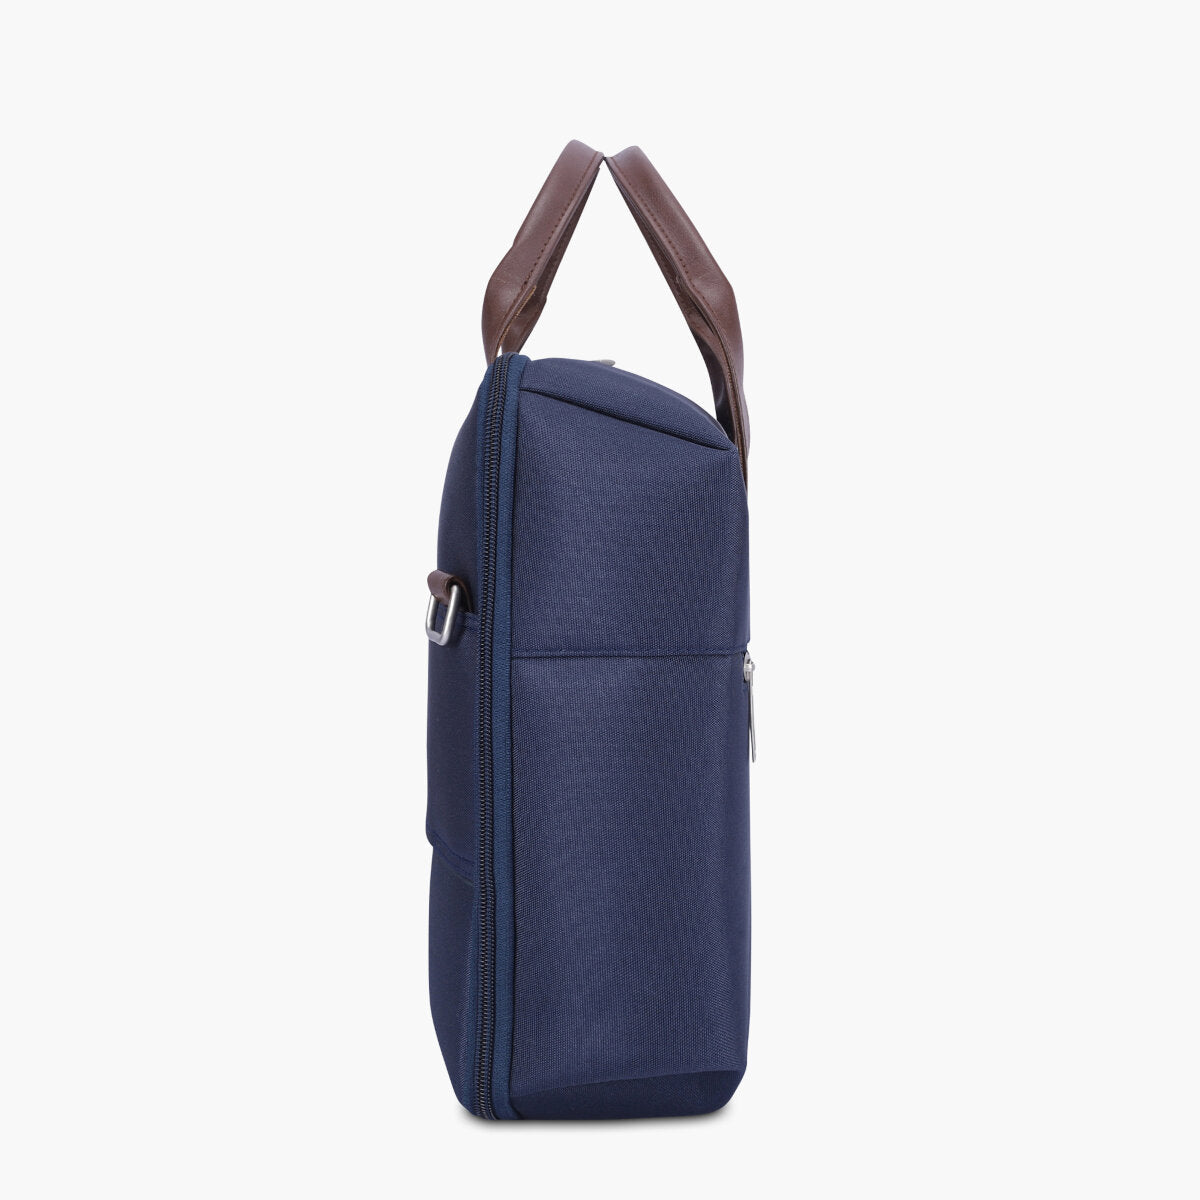 Blue | Protecta Quest Anti-Theft Office Laptop Bag - 4